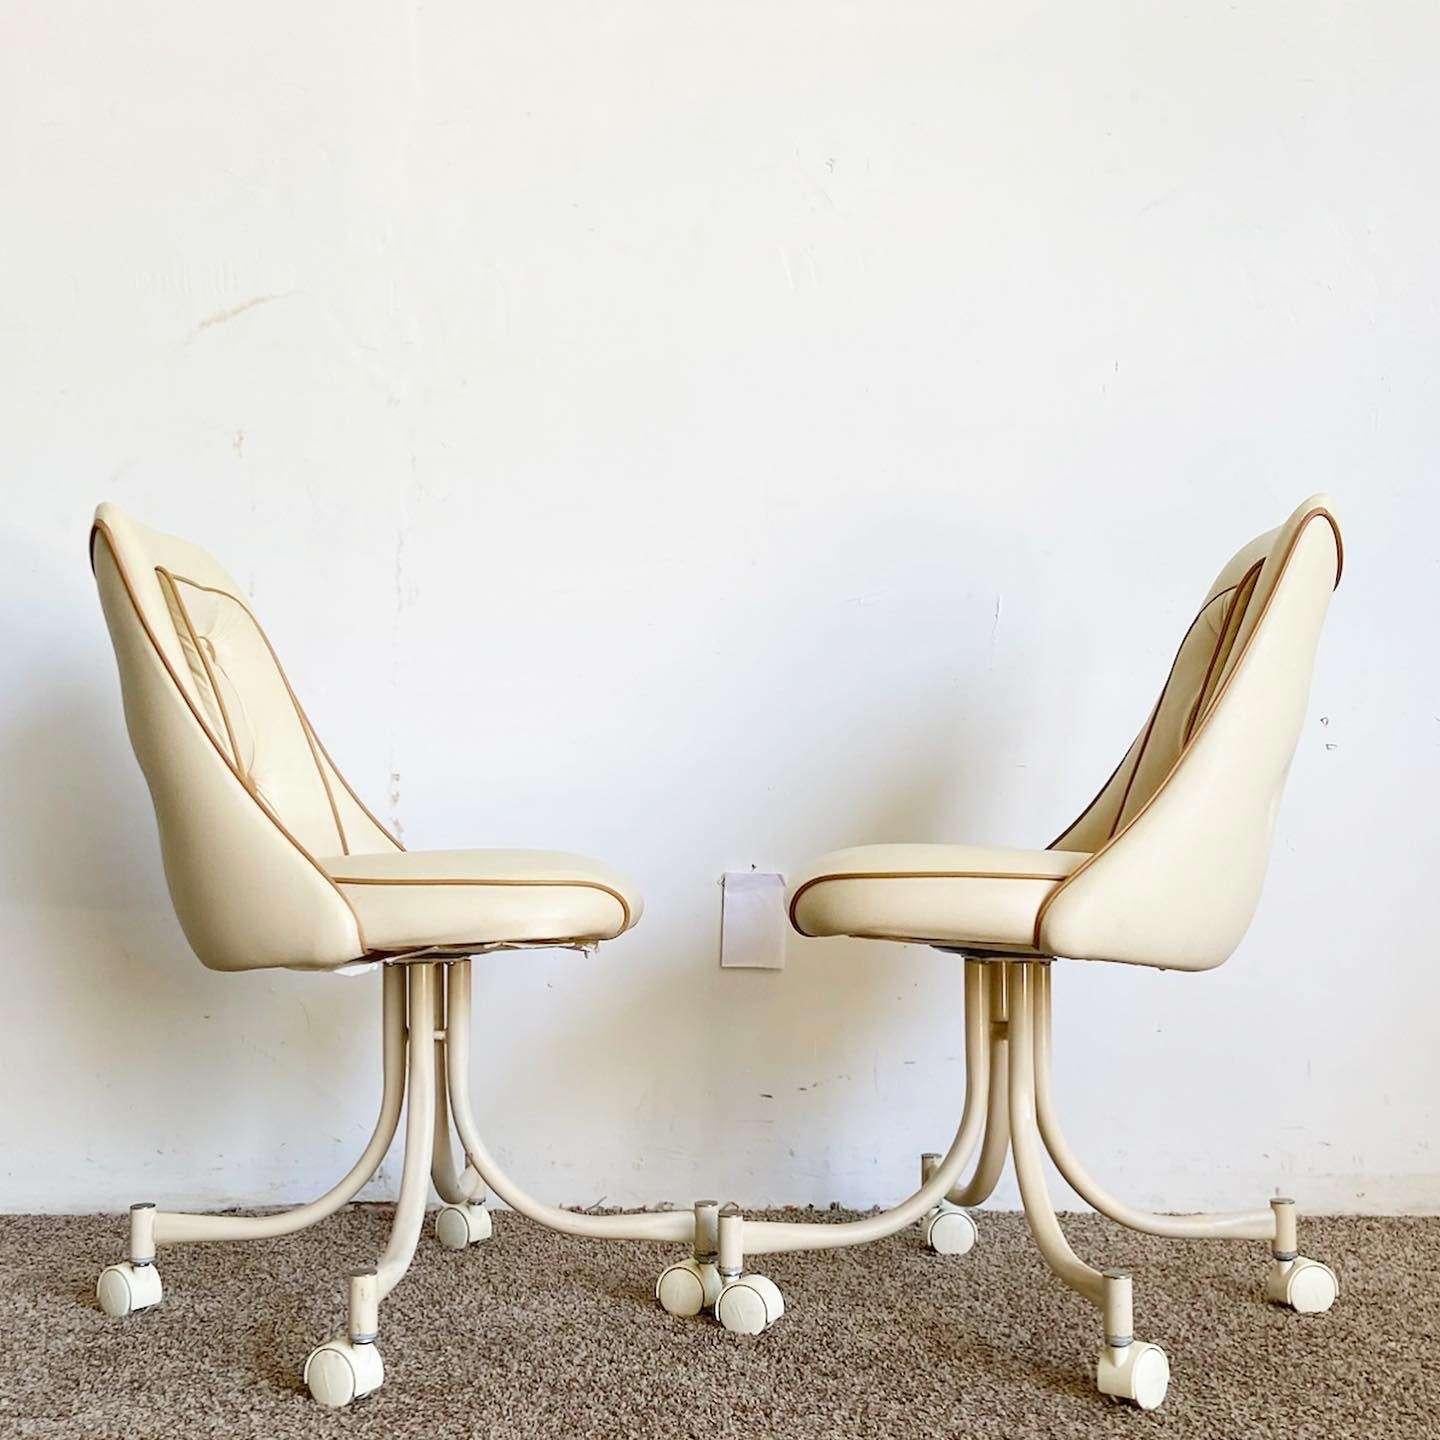 American Mid Century Modern Tans and Brown Tufted Vinyl Dining Swivel Chairs - Set of 4 For Sale